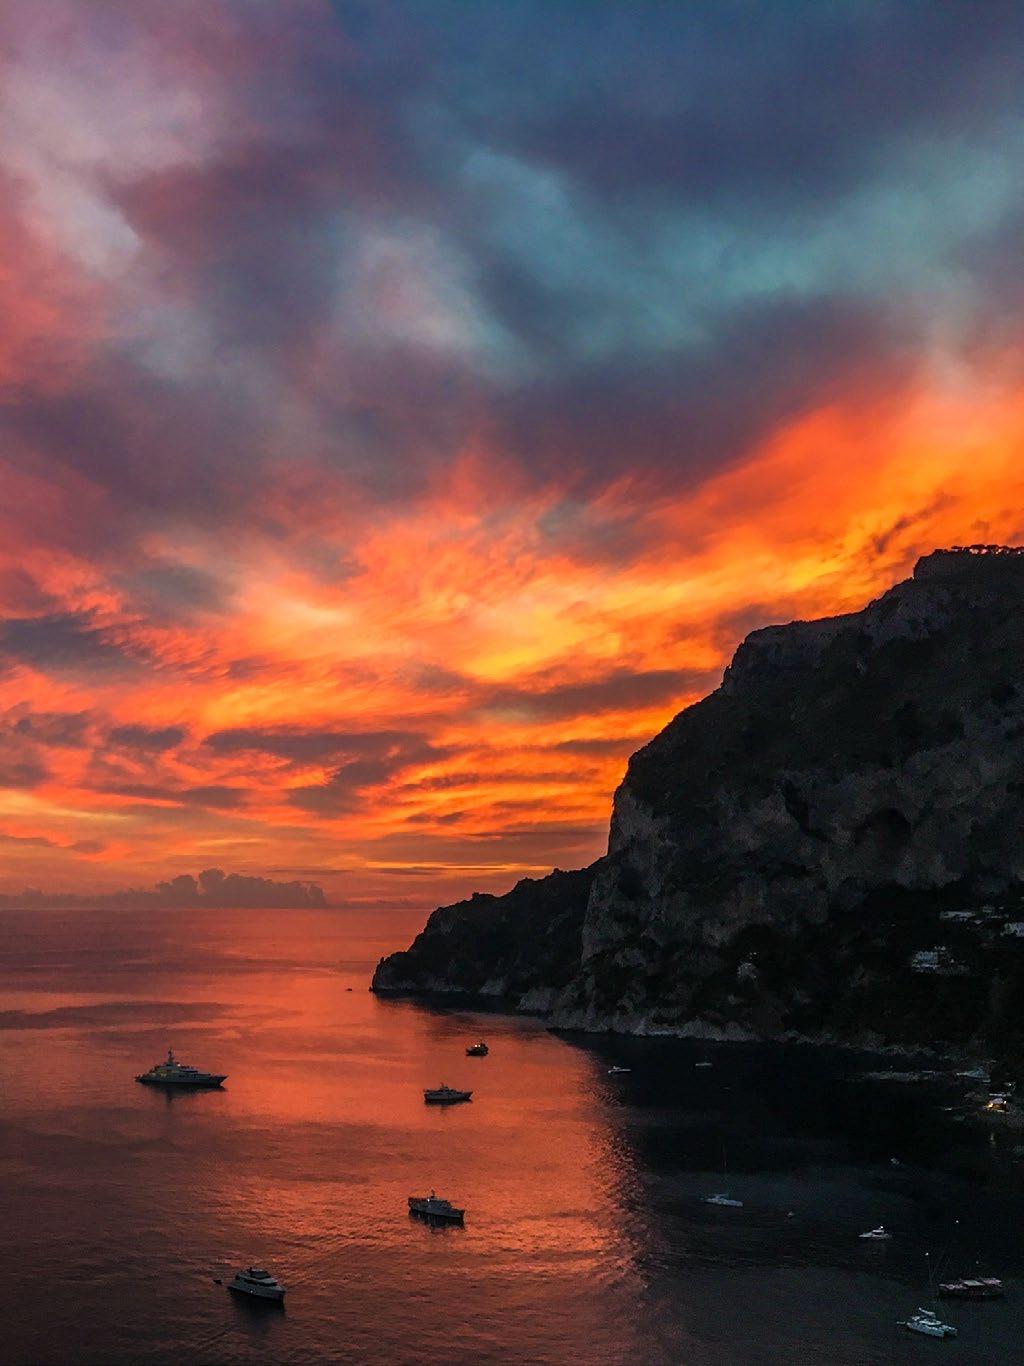 A dramatic sunset photographed on the island of Capri in Italy.